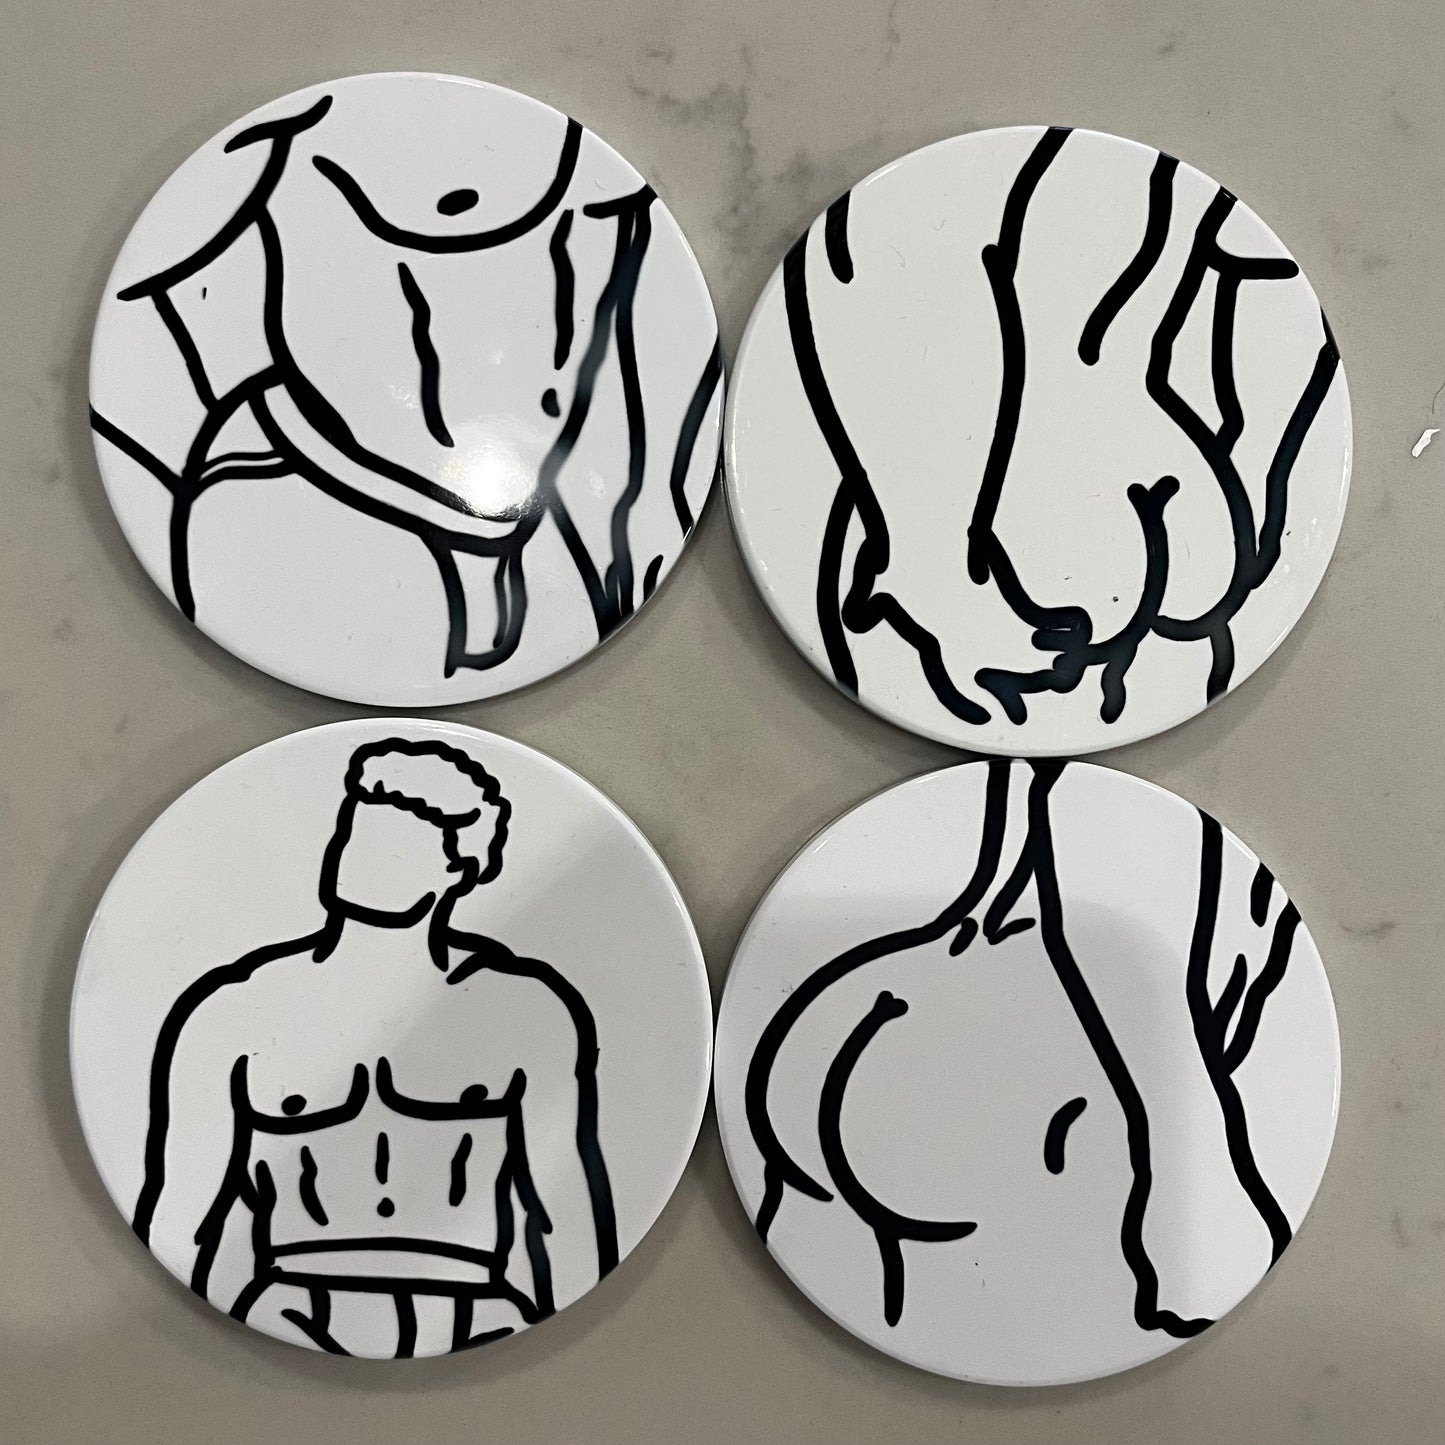 Imperfect Coasters - Sets of 4